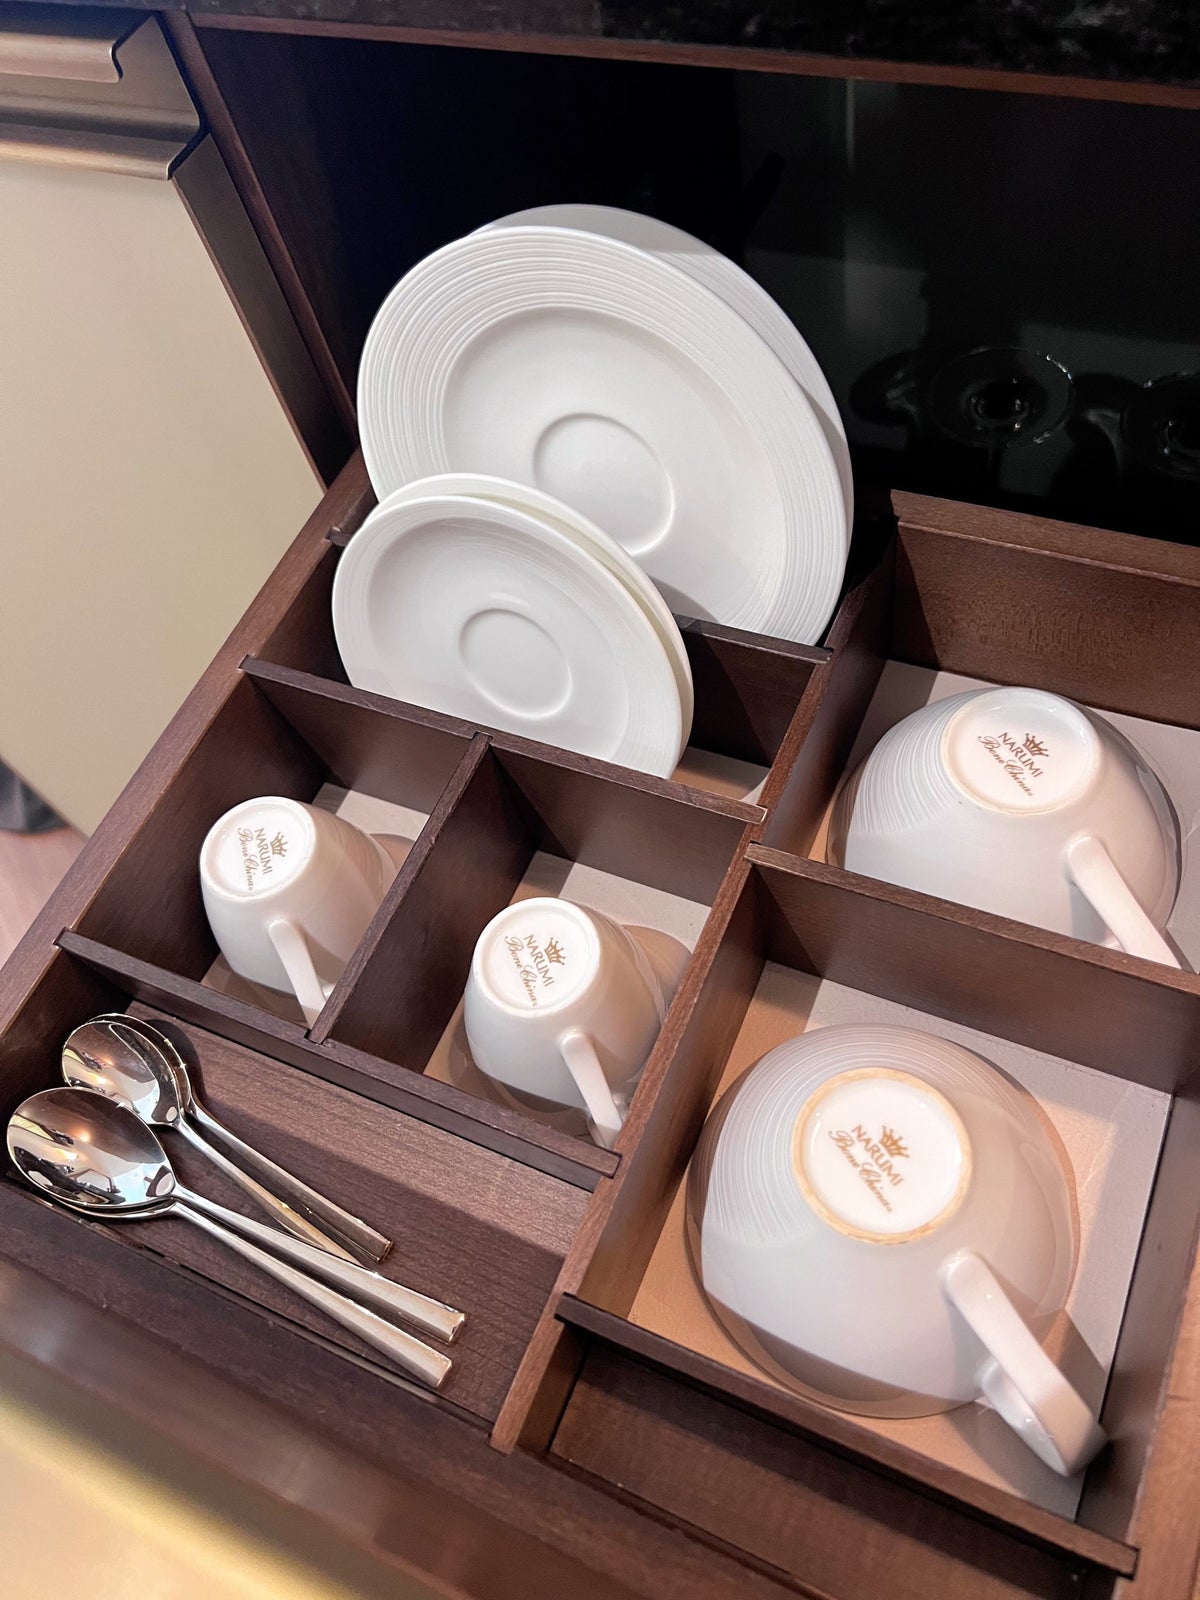 Park Hyatt Zurich in room coffee cups and saucers